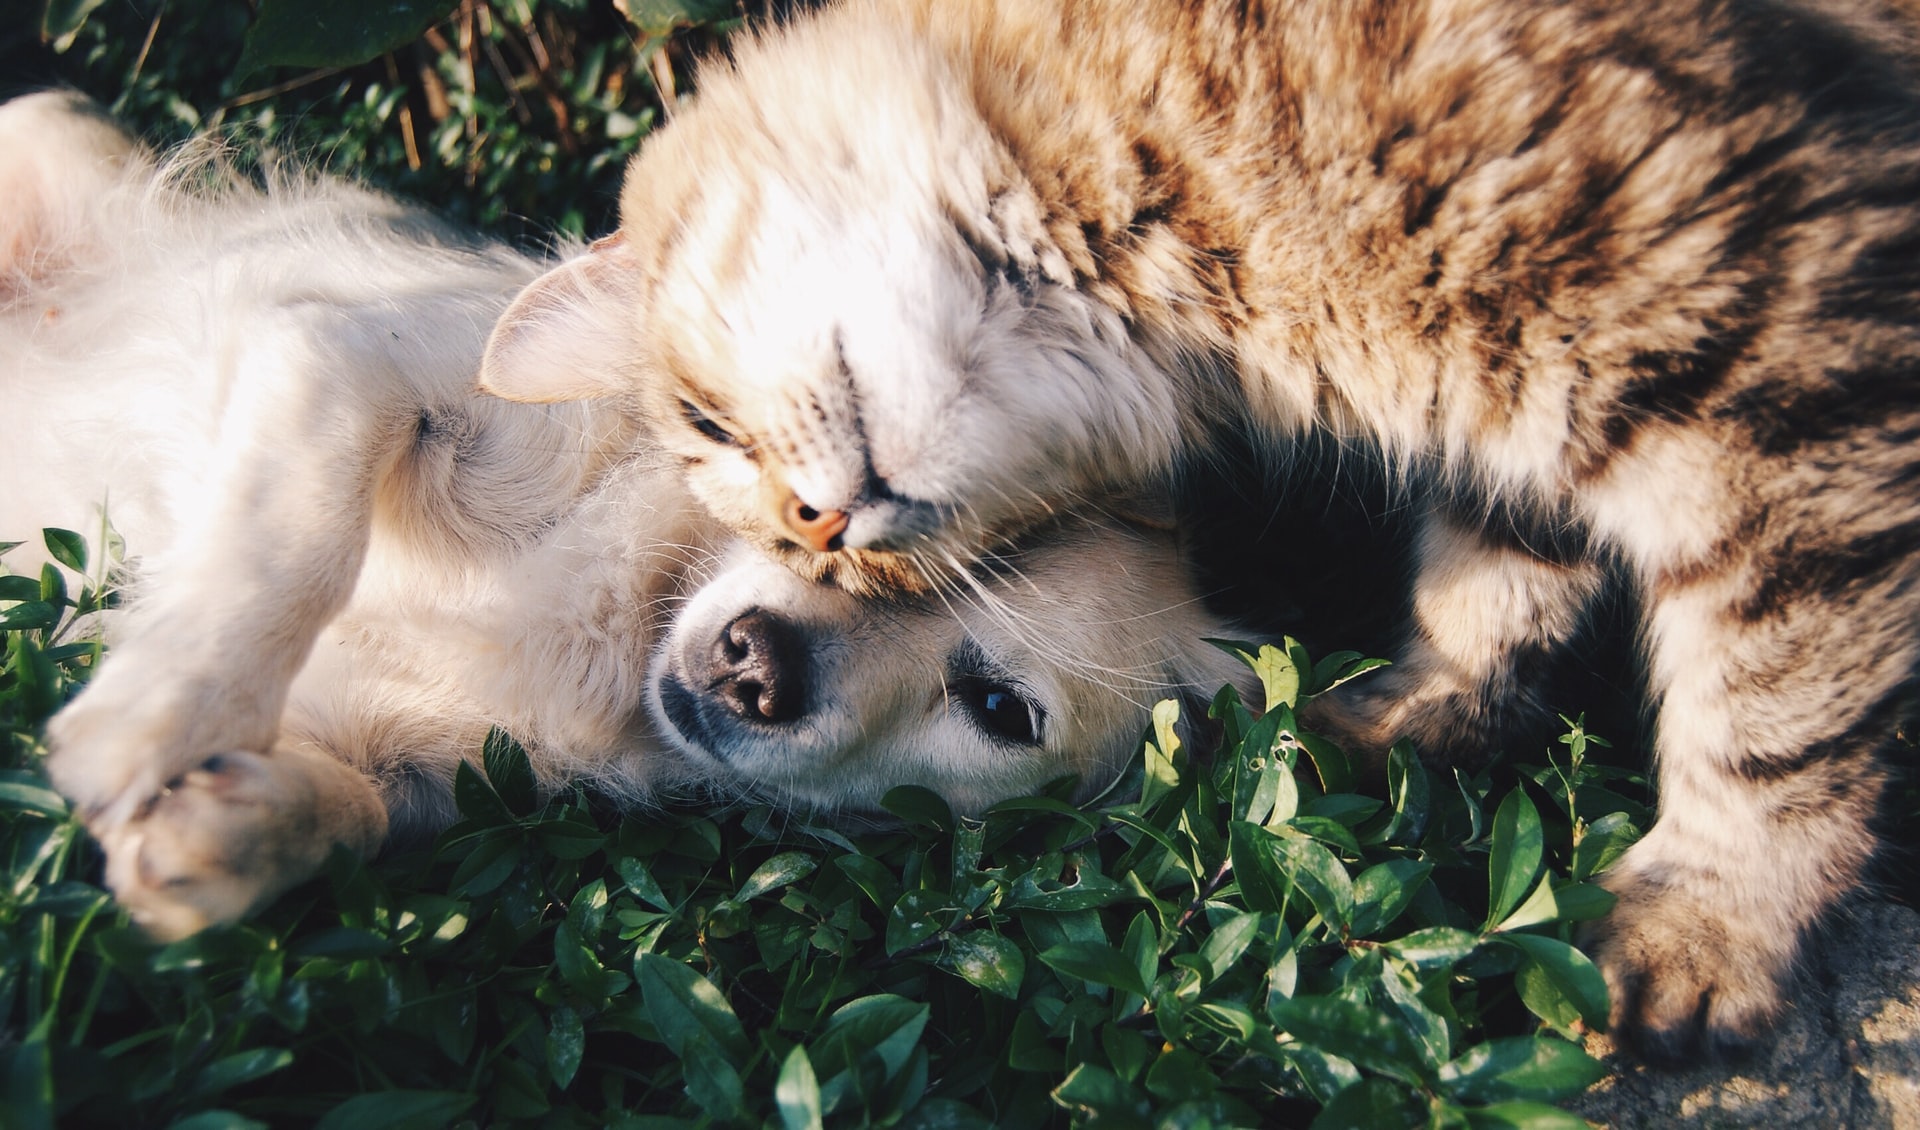 A cat and dog enjoying each other's company.